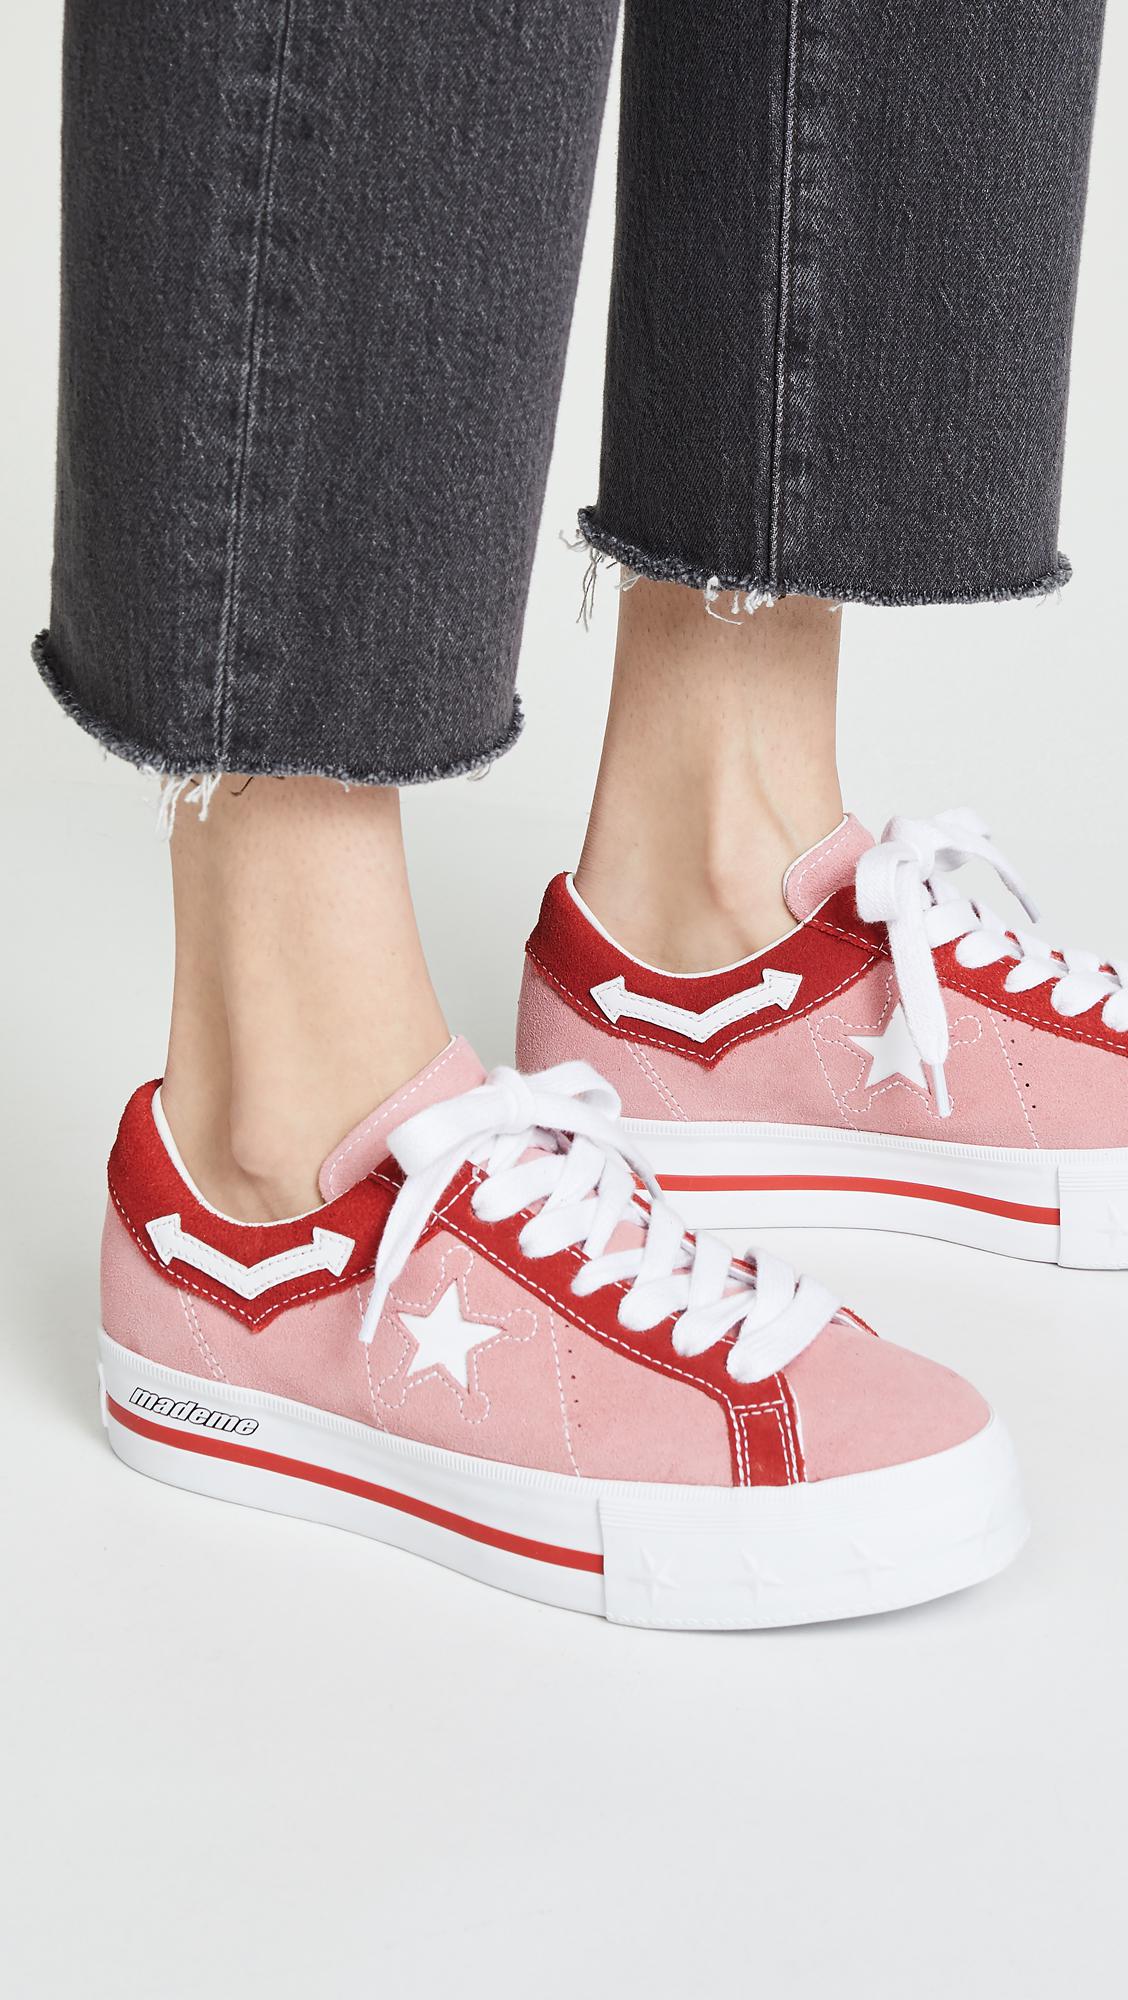 Converse X Mademe One Star Lift Platform Sneakers in Pink | Lyst